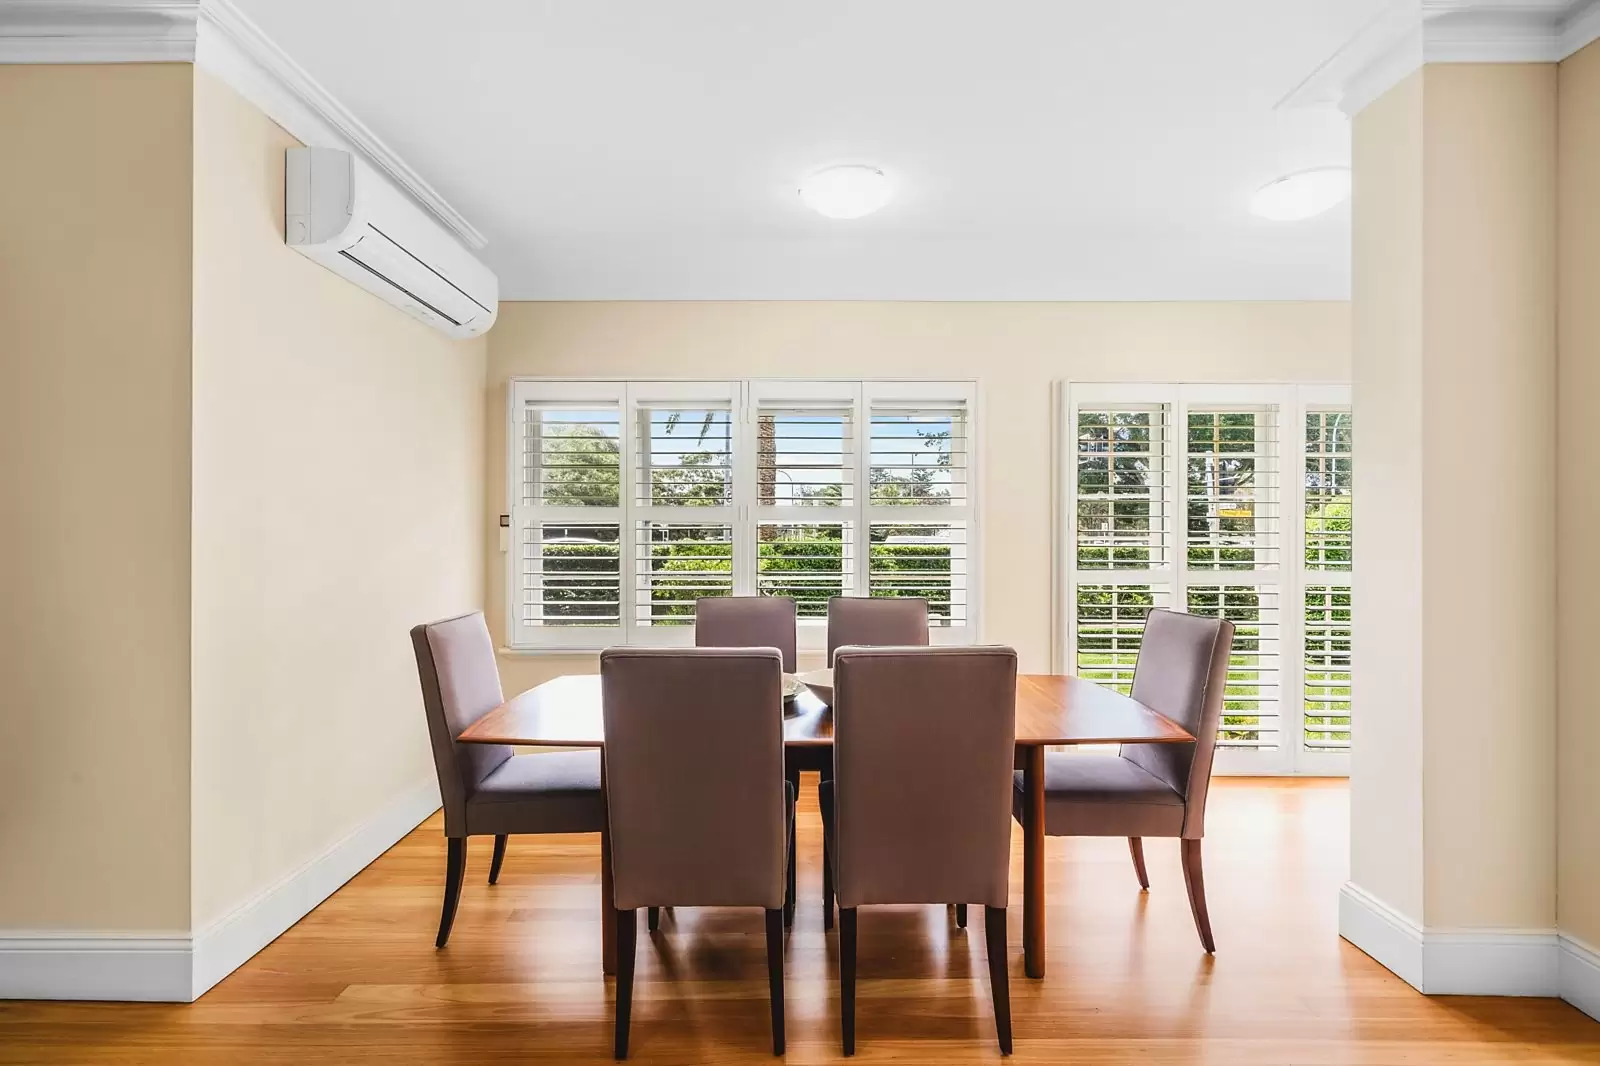 Photo #10: 1/699 New South Head Road, Rose Bay - Sold by Sydney Sotheby's International Realty